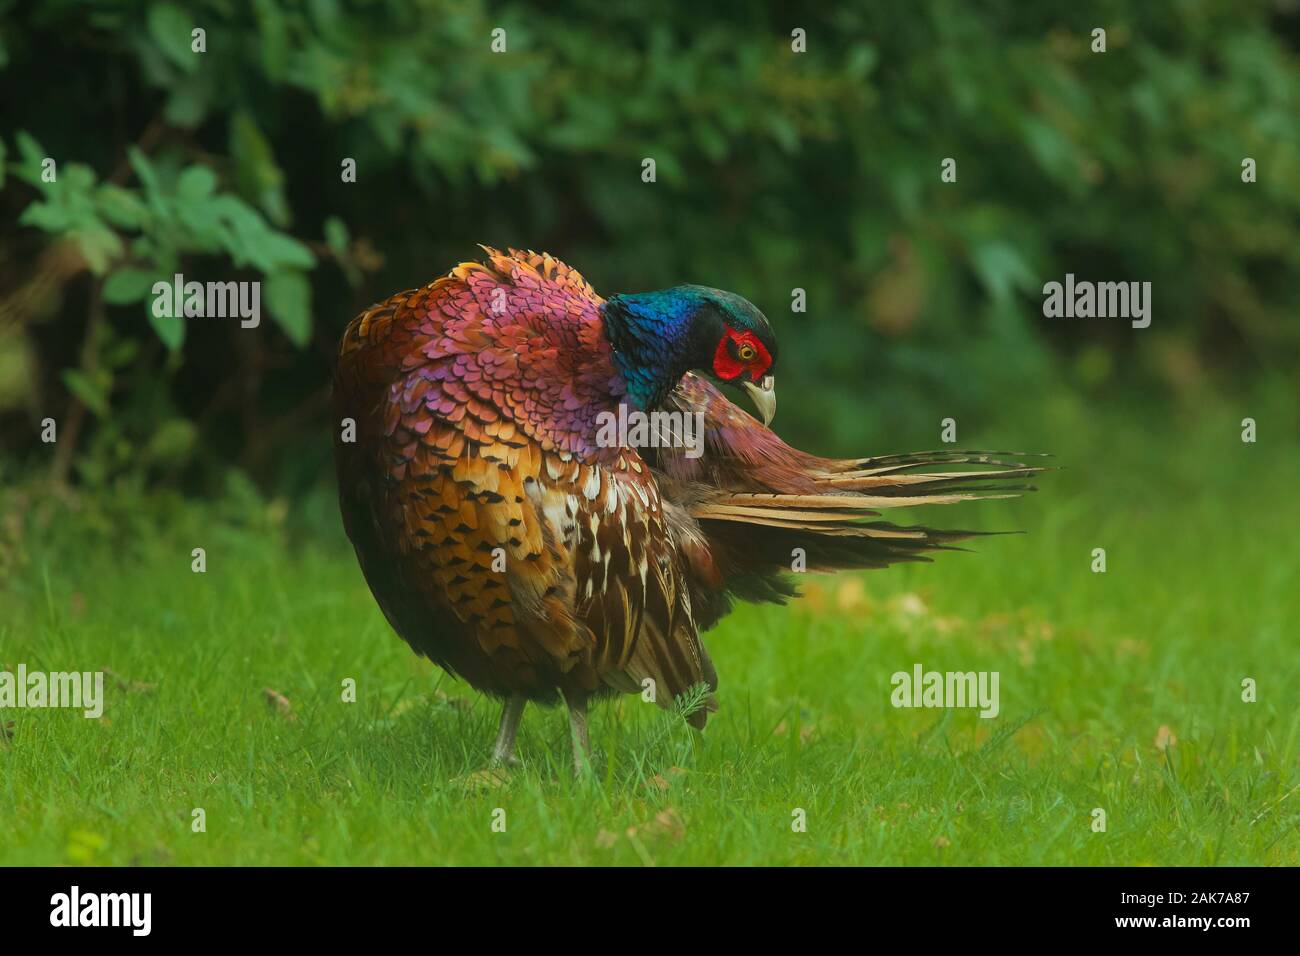 Male Pheasant grooming its plumage with Bright Colors and Bold Hues Stock Photo